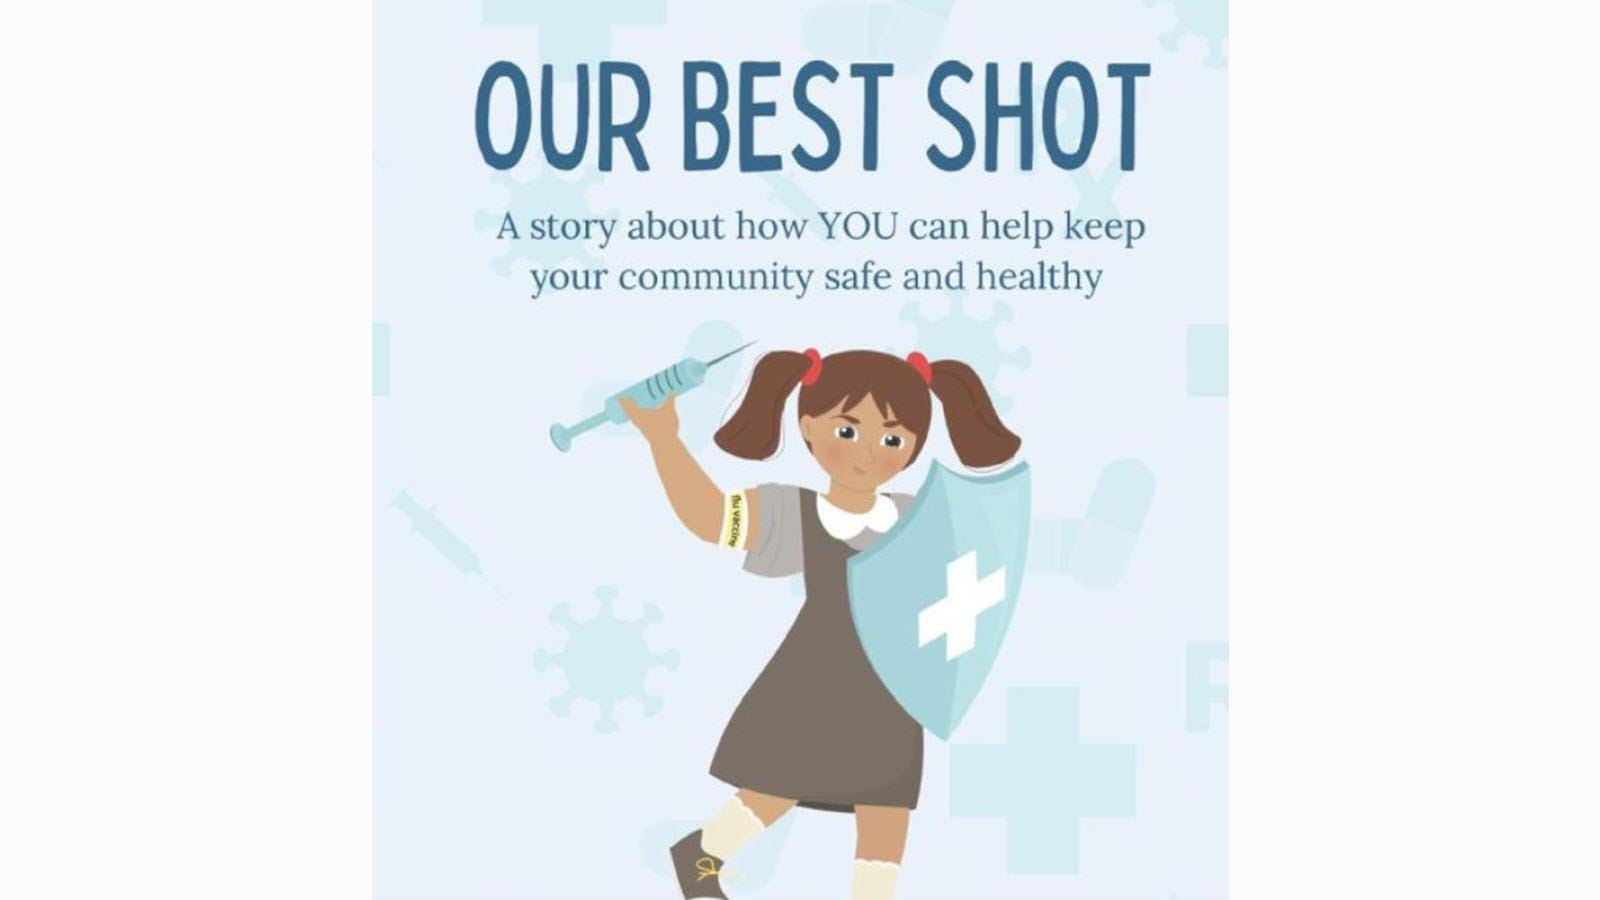 Cover of children's book Our Best Shot showing a child in a dress with a shield and a vaccine syringe